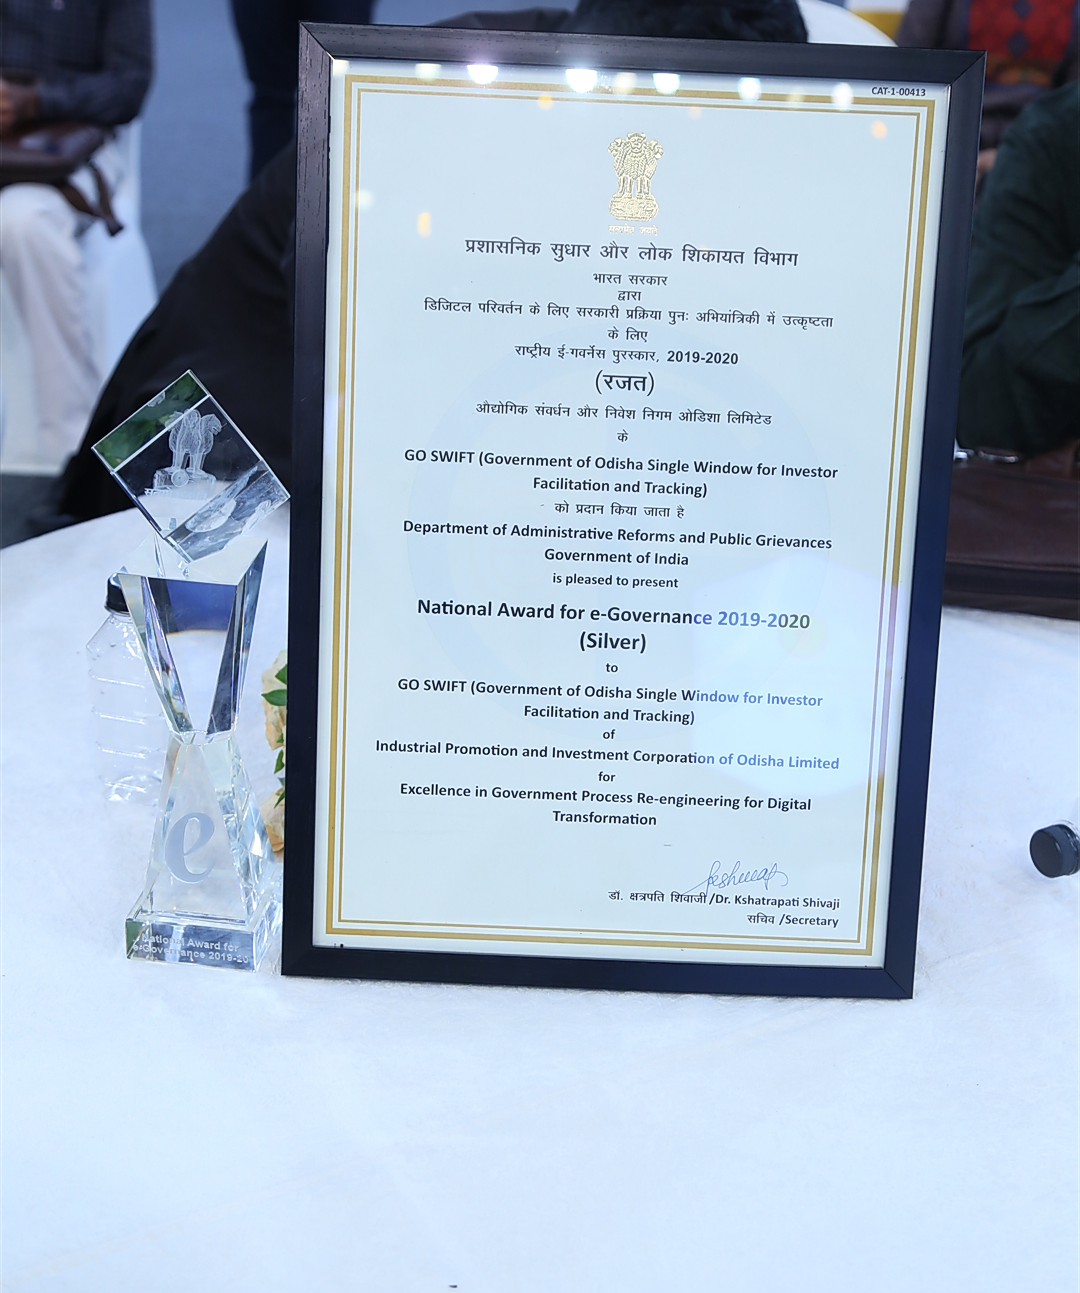 Award presented by Government of India’s Department of Administrative Reforms & Public Grievances